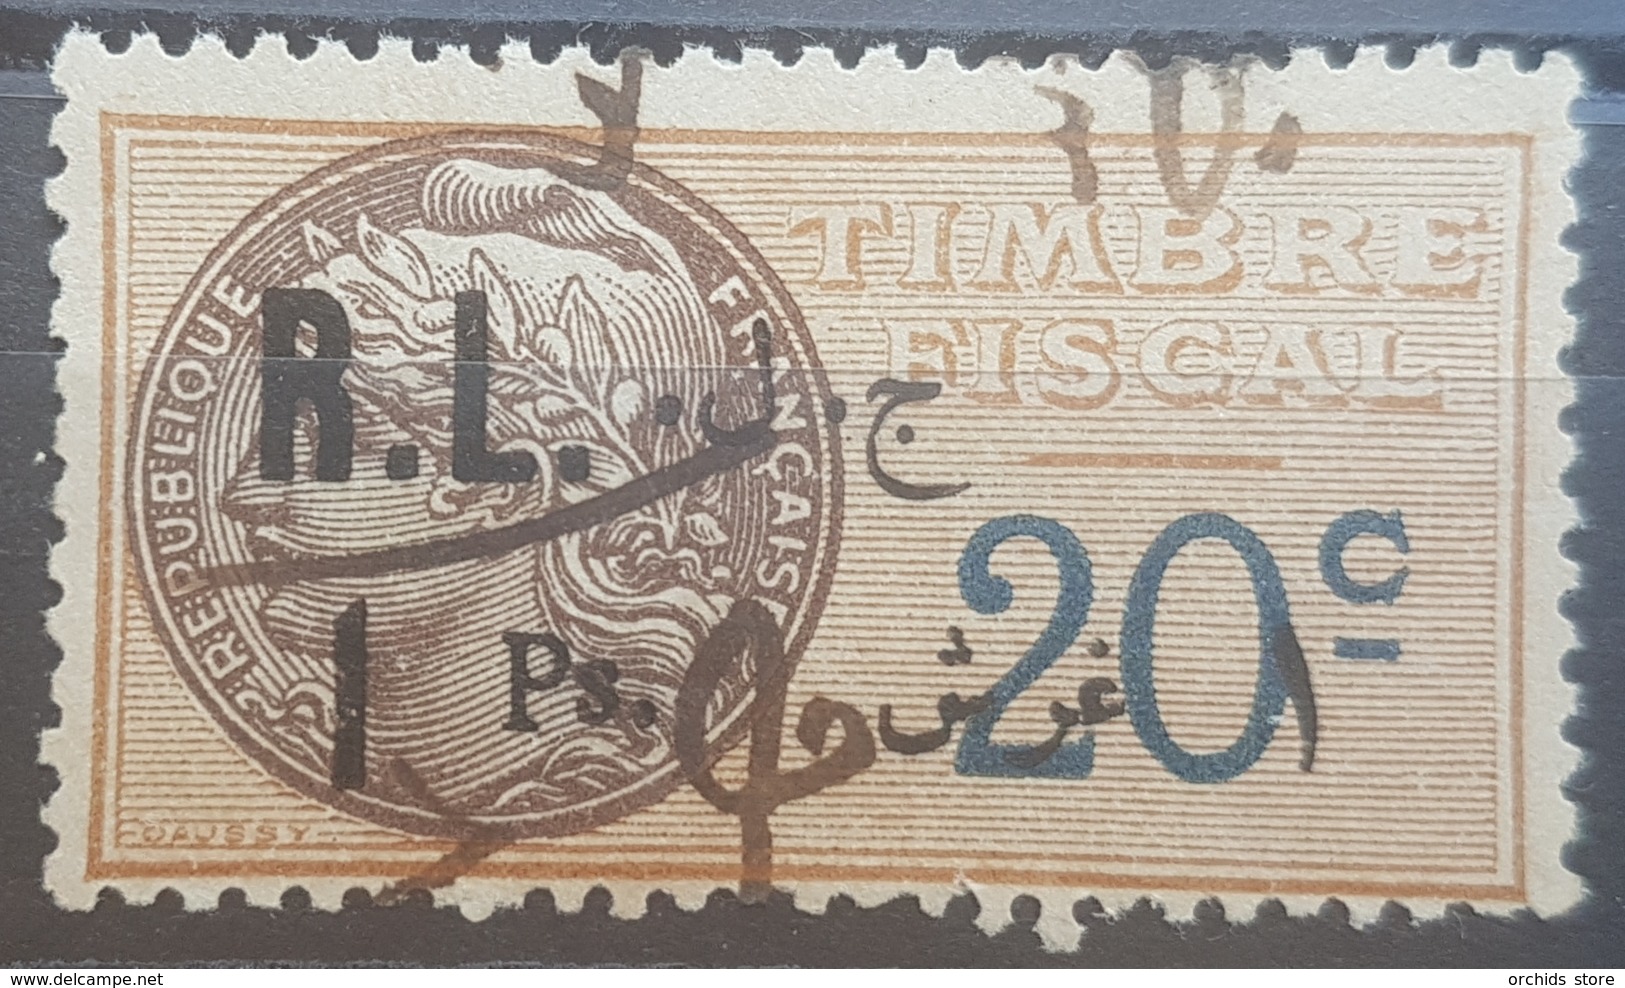 NO11 #13 - Lebanon 1926 1 Ps On 20c Bistre Fiscal Revenue Stamp, Without "Droit Fiscal" - Lebanon